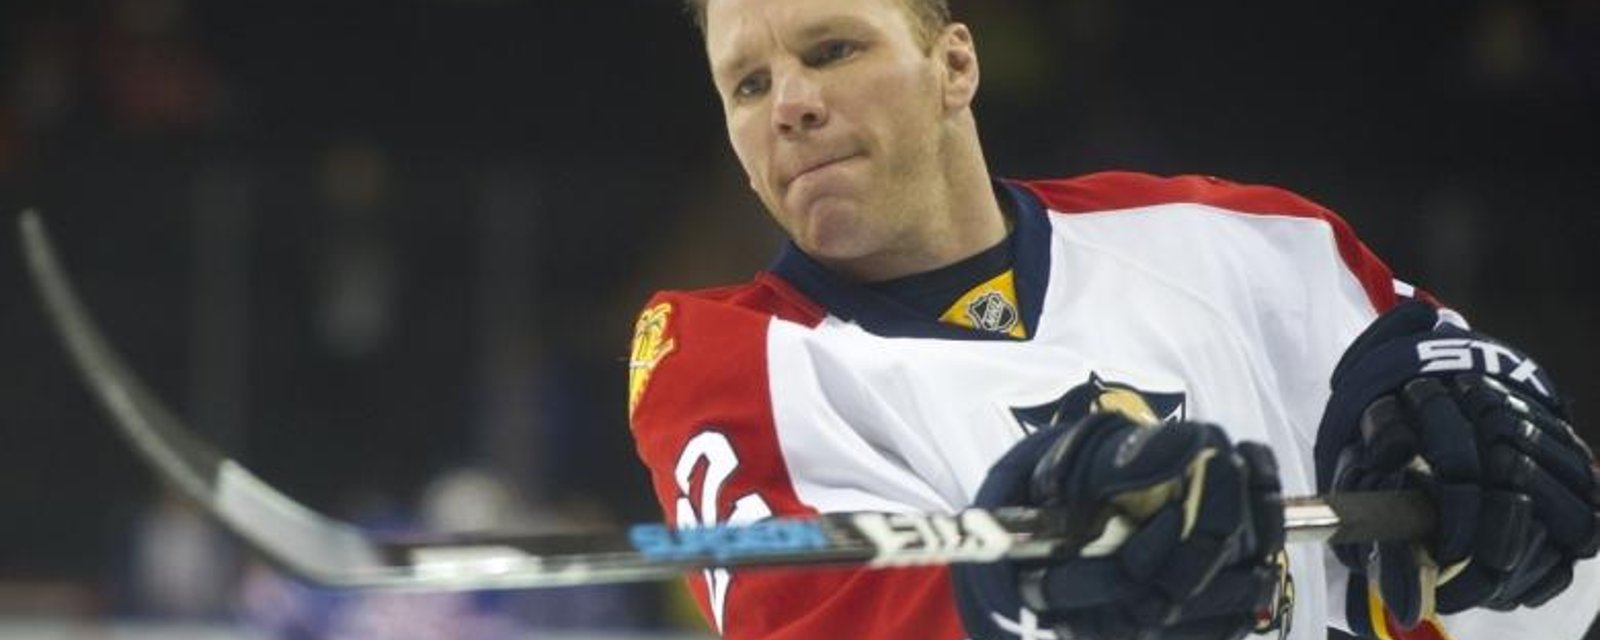 Shawn Thornton delivers by far the best trash talk of the playoffs.